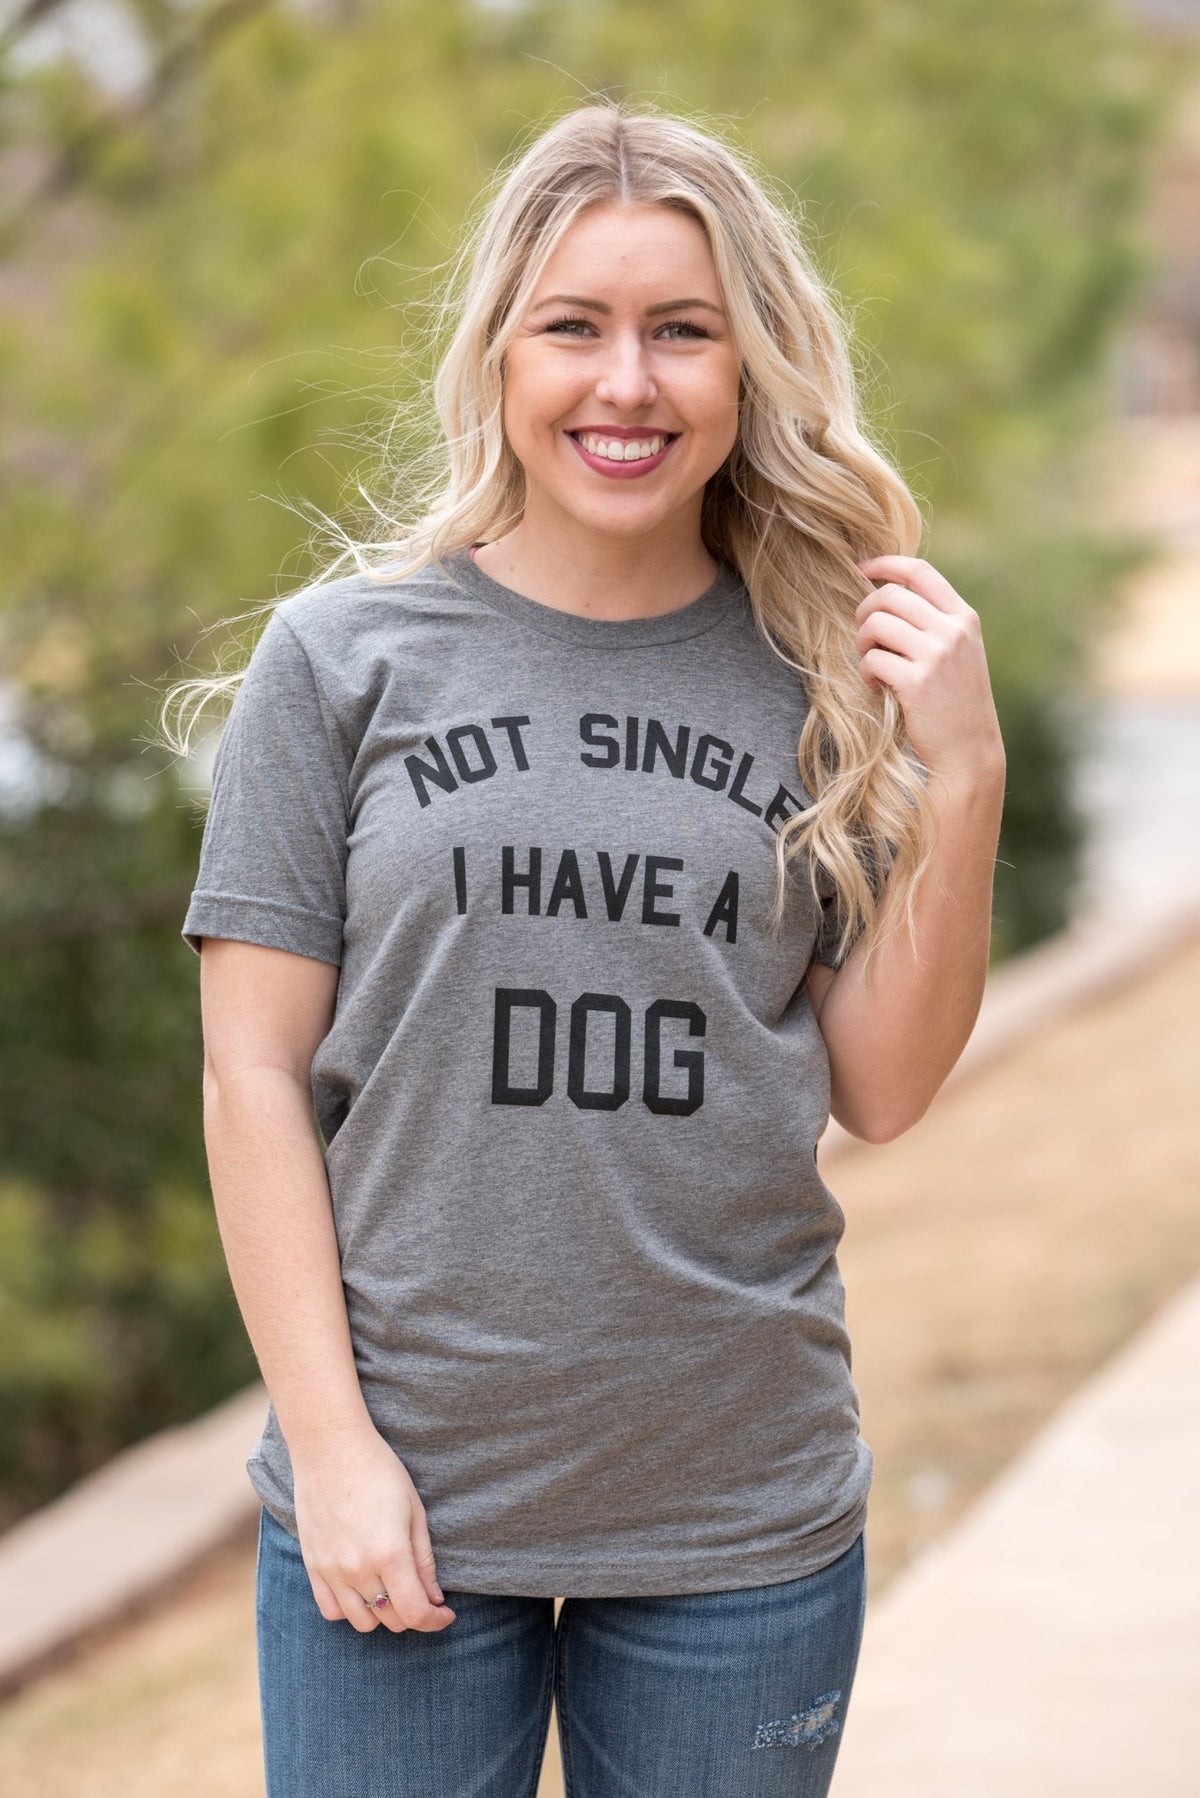 Not single I have a dog unisex short sleeve t-shirt grey - Stylish T-shirts - Trendy Graphic T-Shirts and Tank Tops at Lush Fashion Lounge Boutique in Oklahoma City